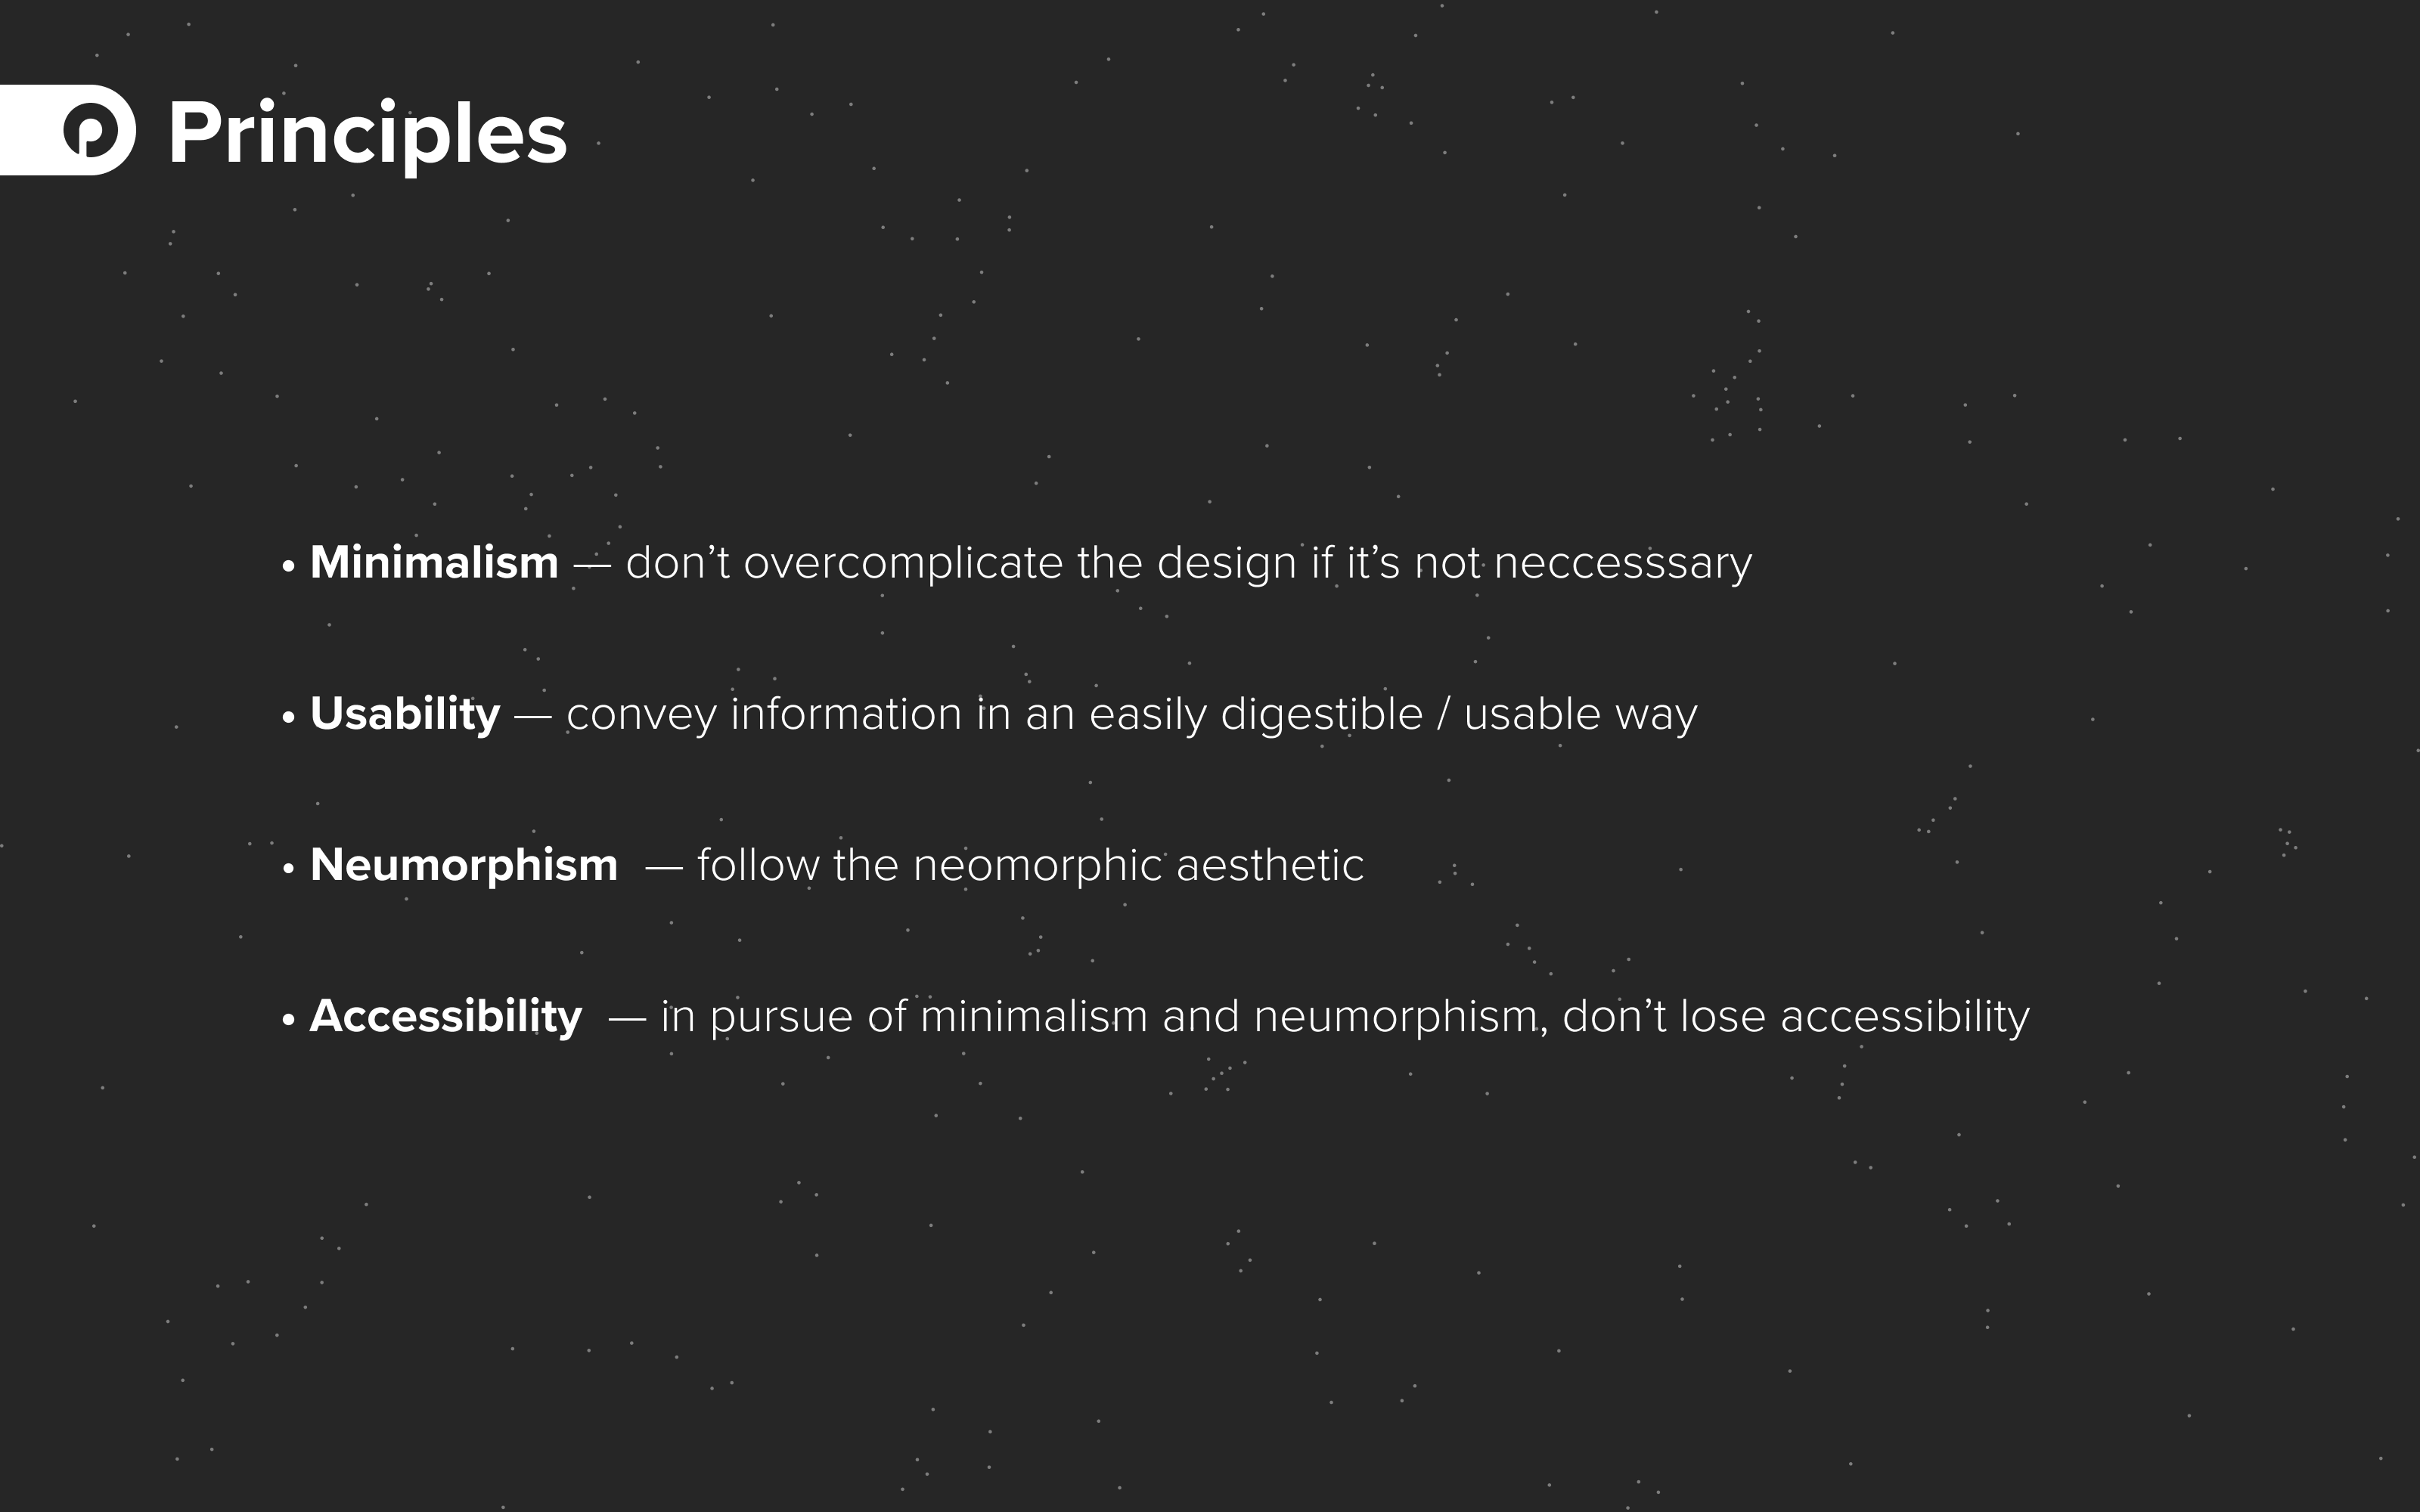 Dark slide with start in the background. Text on slide: Principles.  • Minimalism — don’t overcomplicate the design if it’s not neccesssary • Usability — convey information in an easily digestible / usable way • Neumorphism  — follow the neomorphic aesthetic • Accessibility  — in pursue of minimalism and neumorphism, don’t lose accessibility